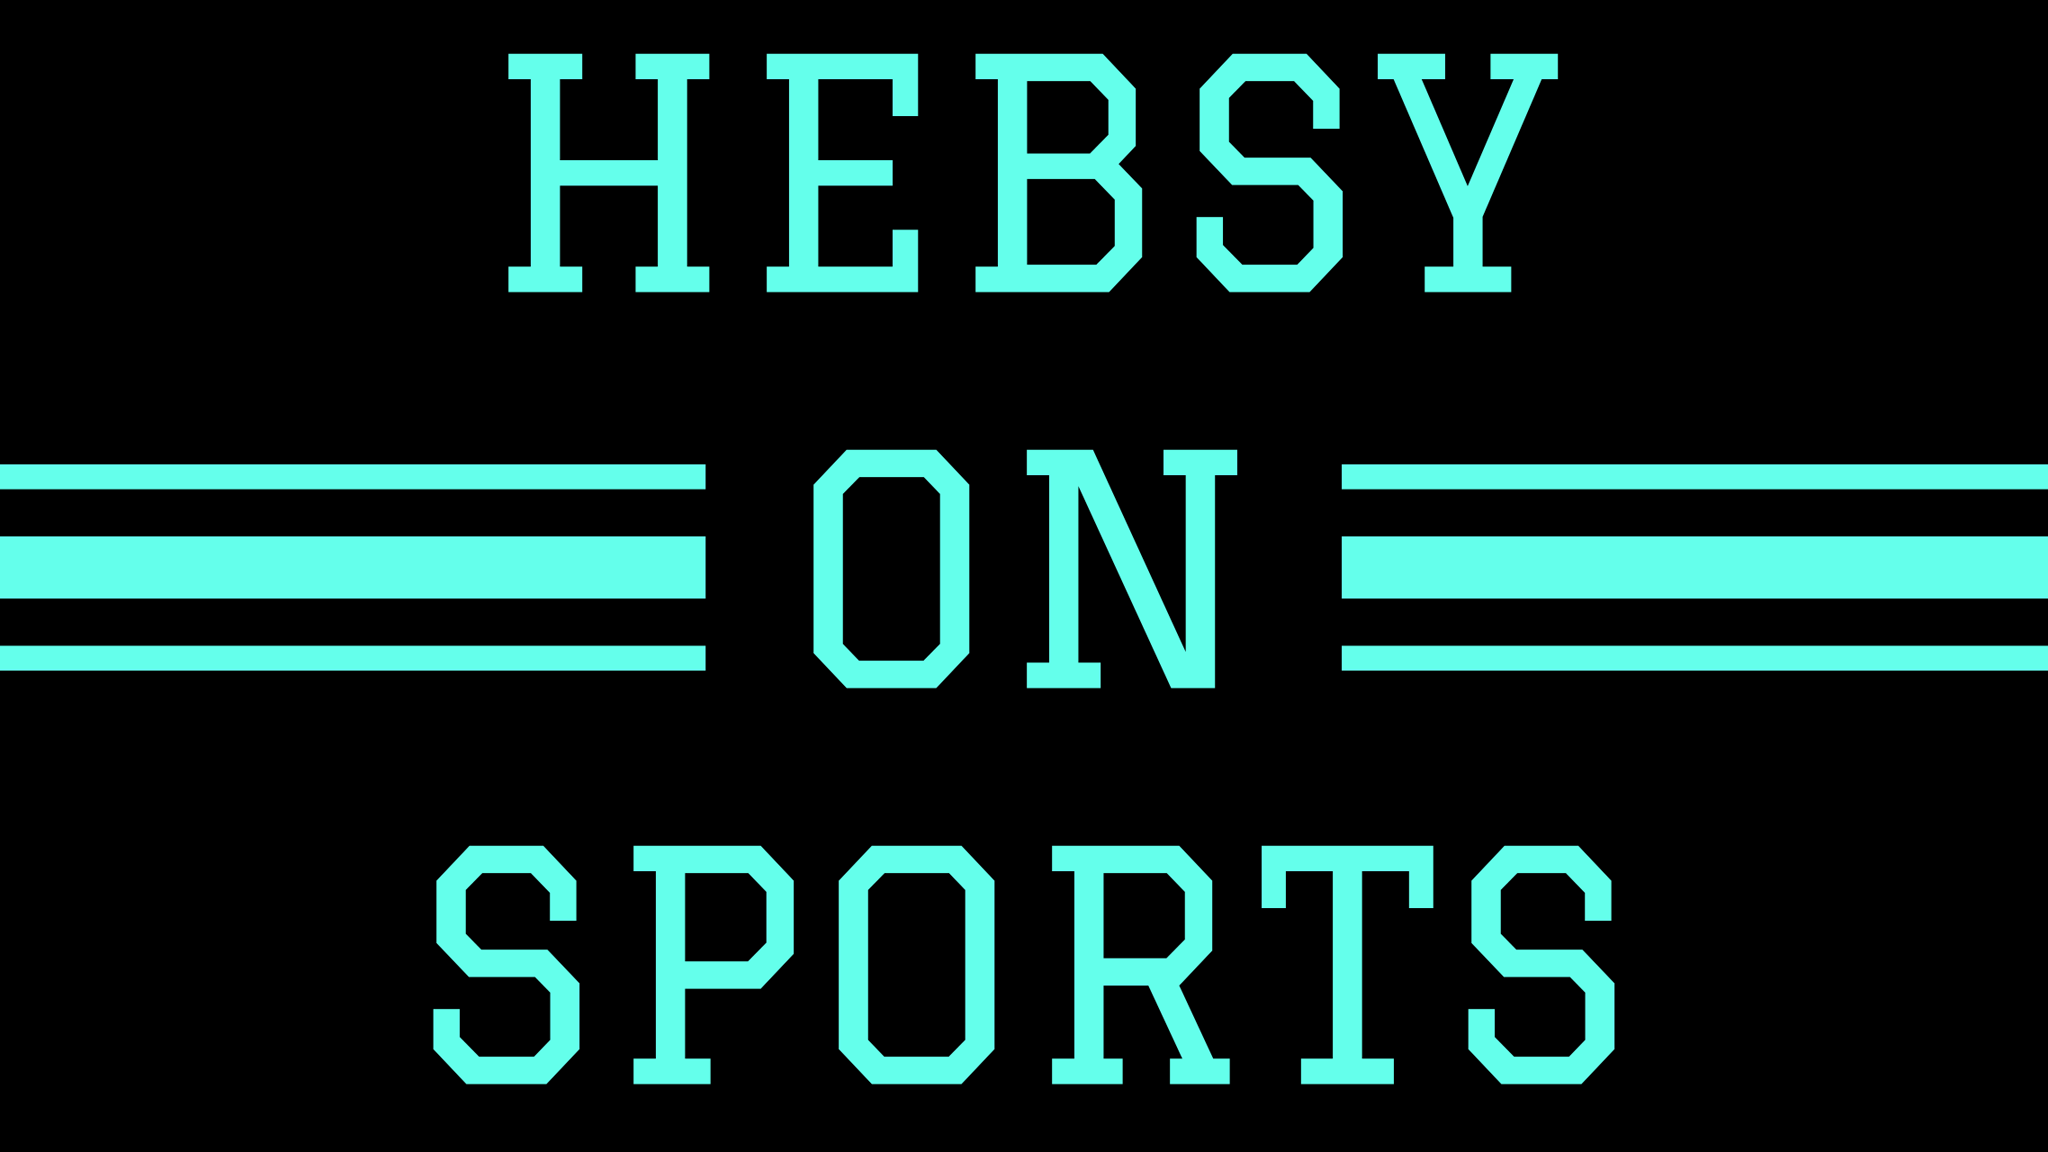 Hebsy on Sports for September 10, 2021